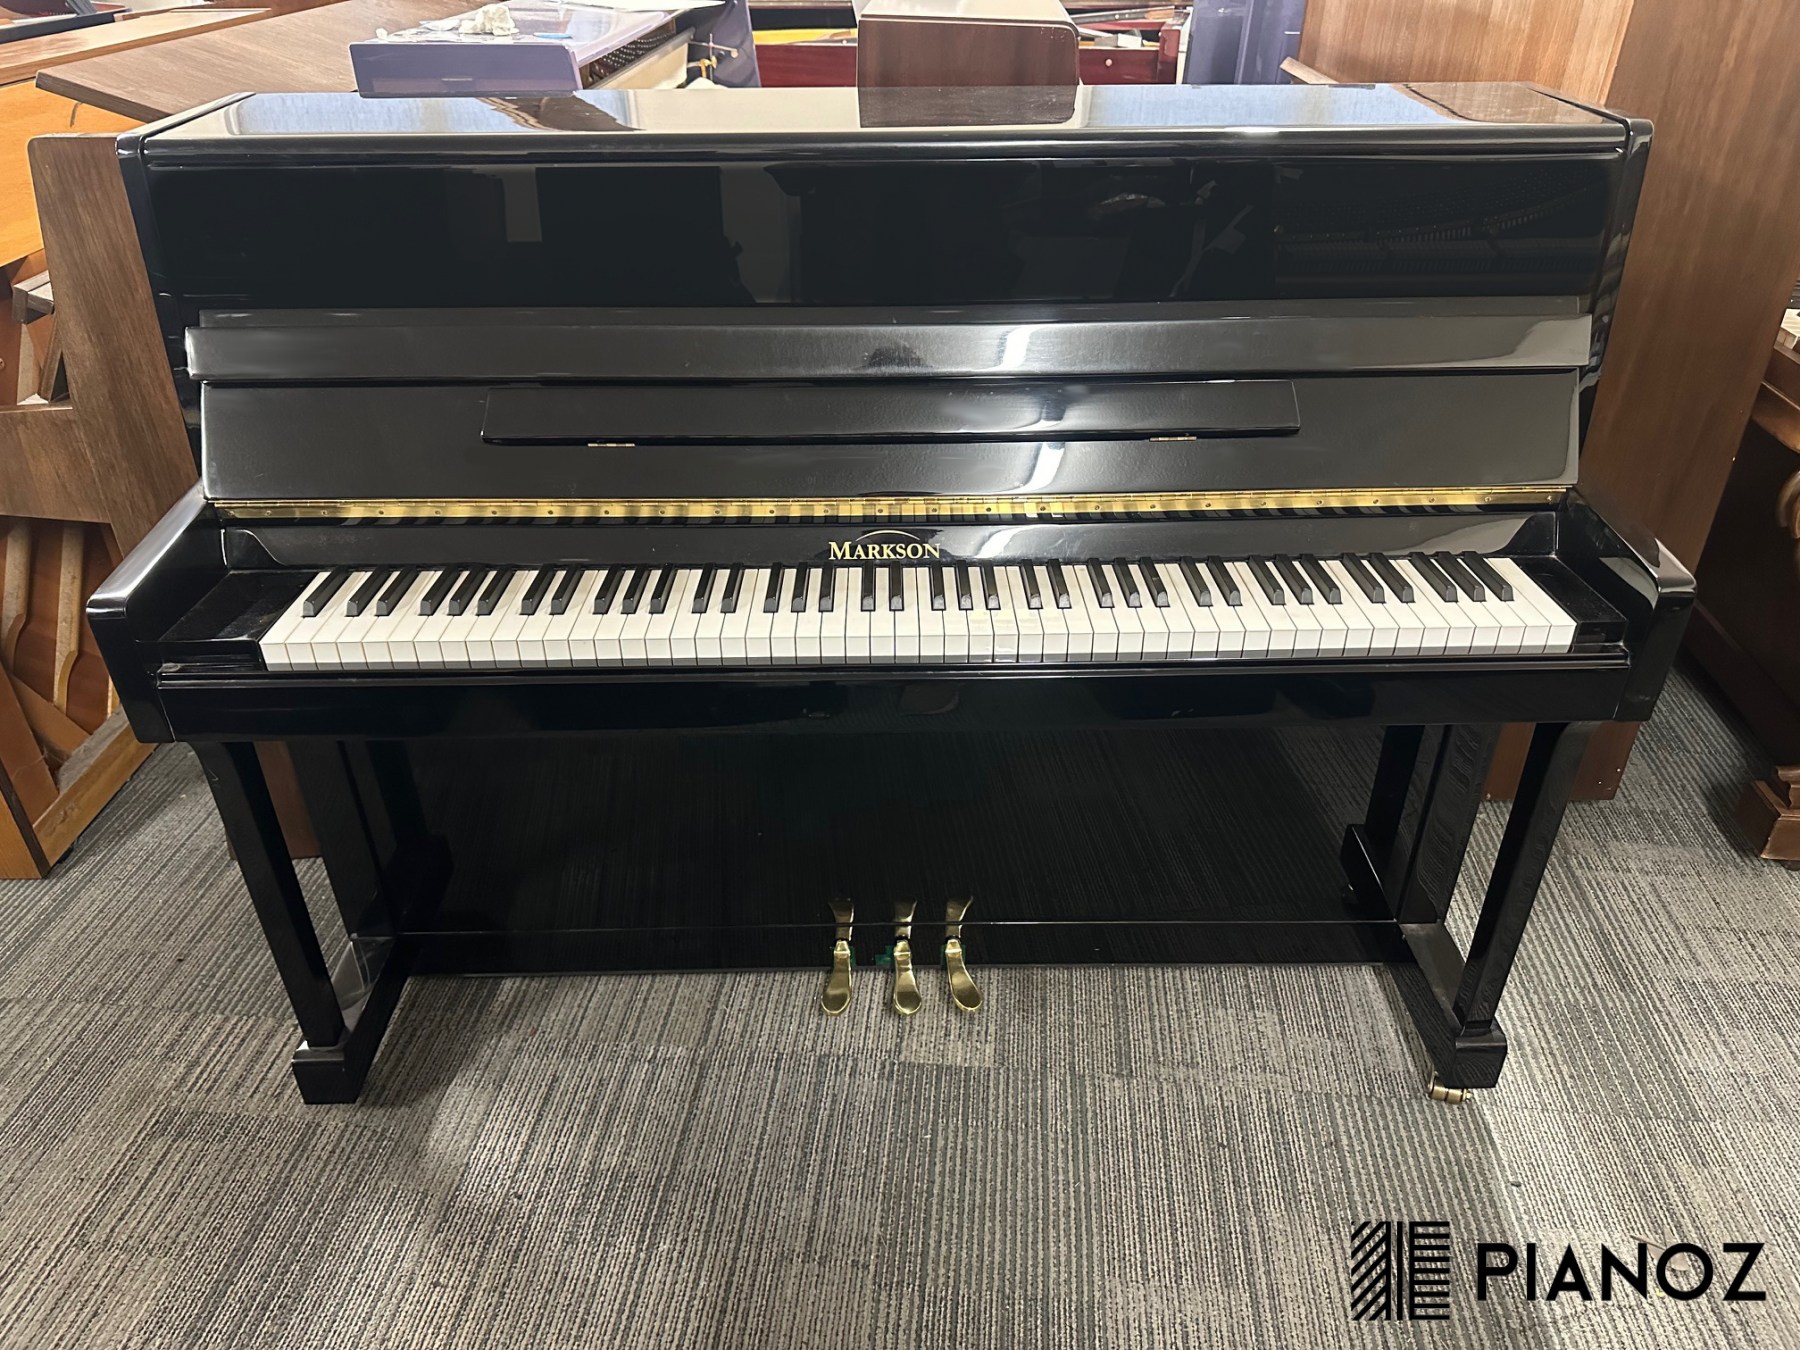 Markson Black High Gloss Upright Piano piano for sale in UK